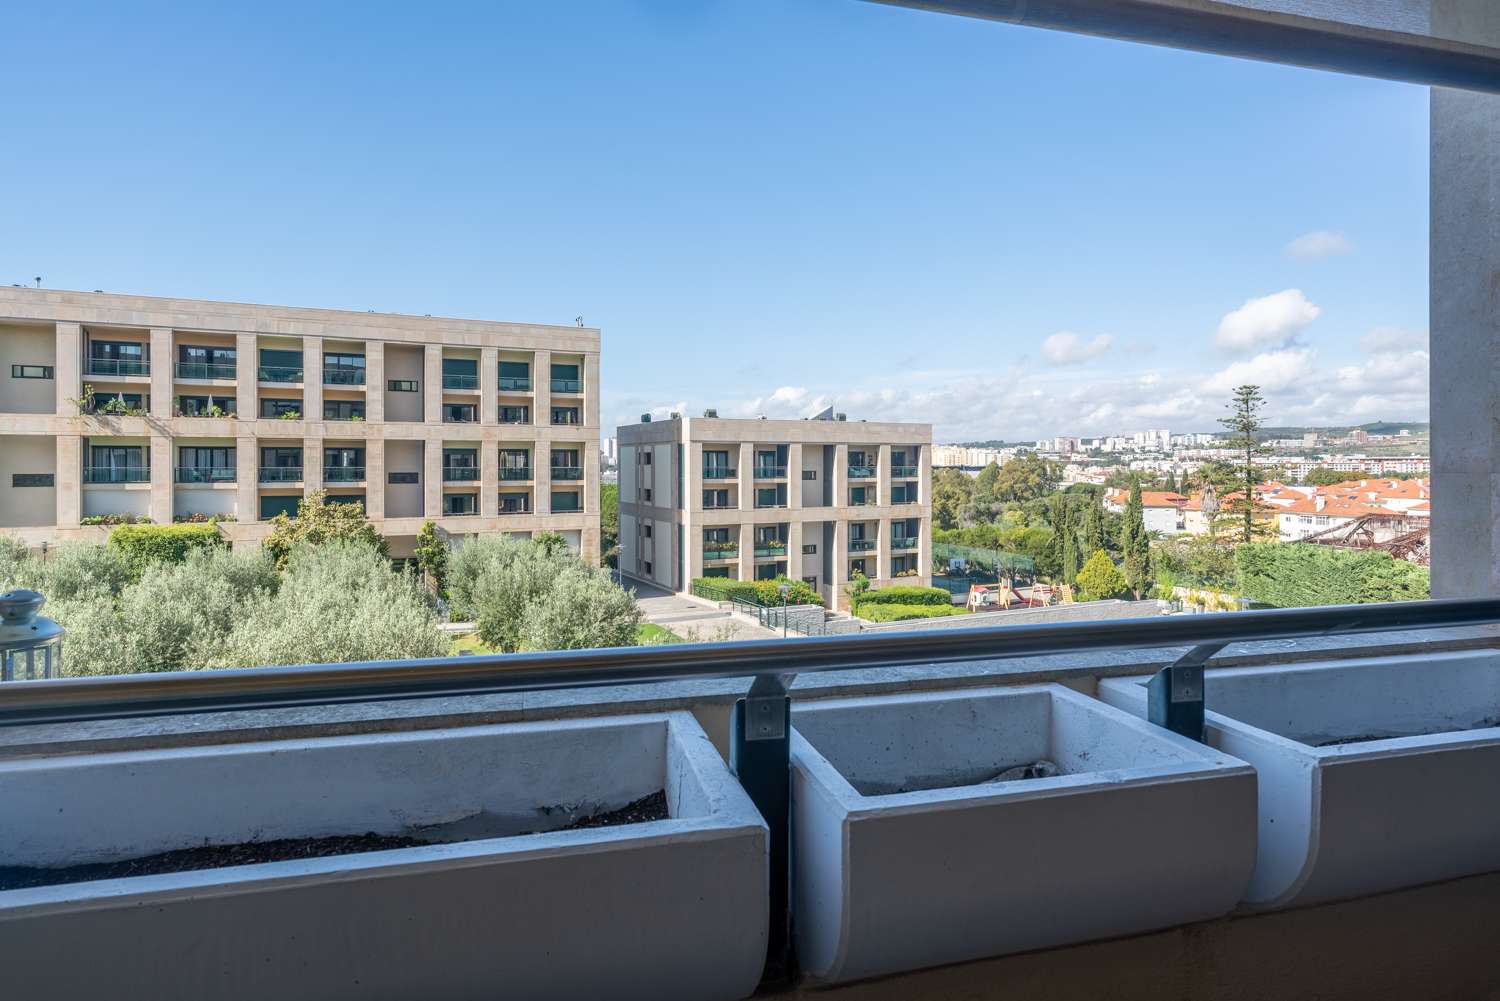 3-bedroom apartment in the Villa Restelo for lease